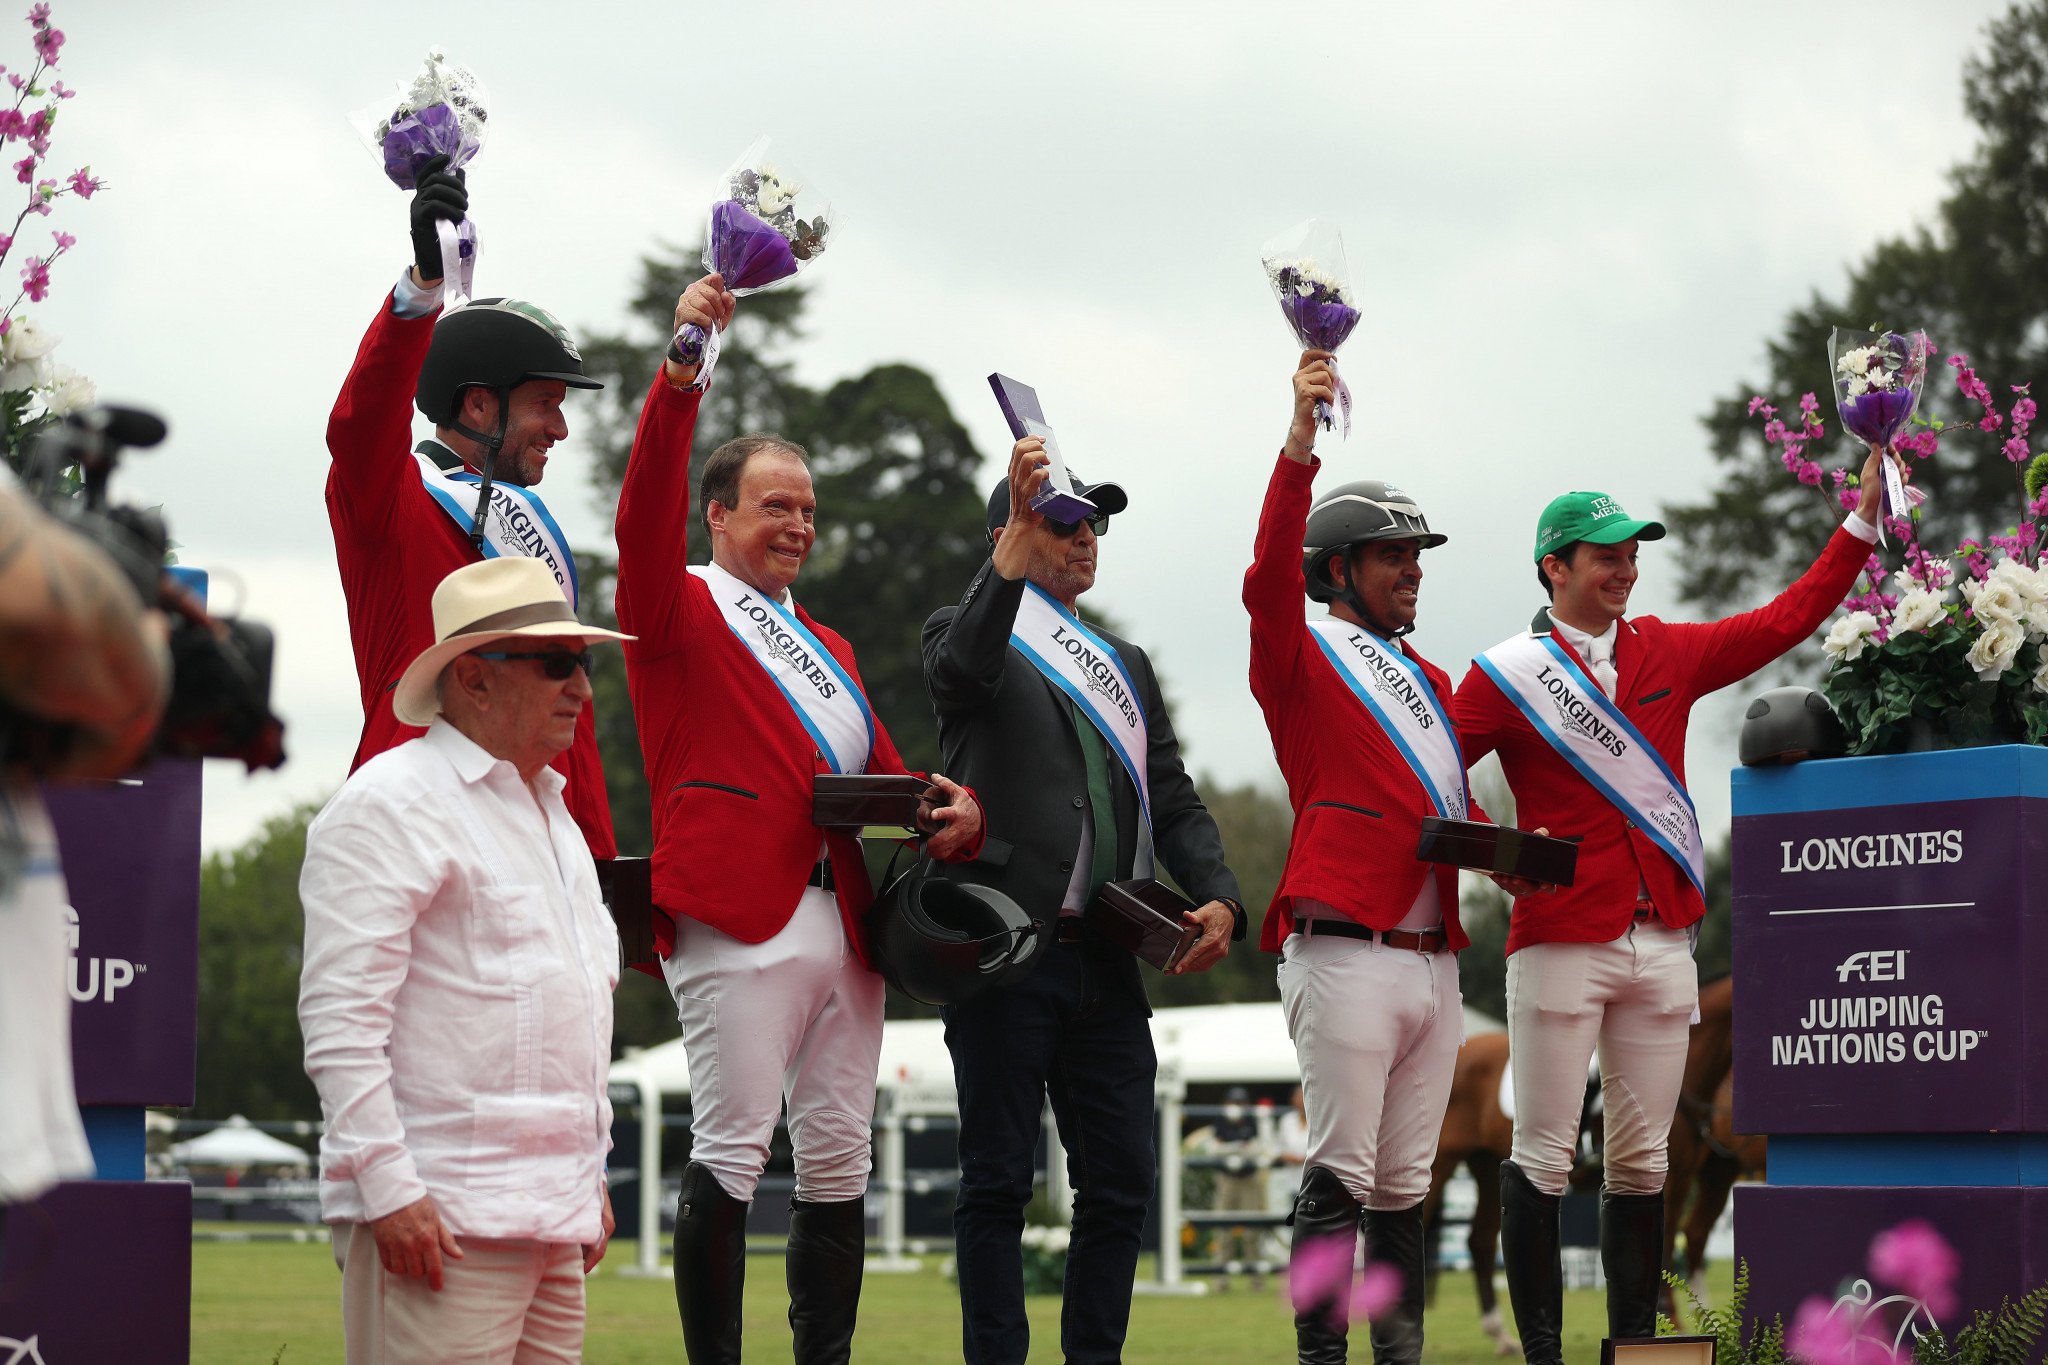 The winning team from Mexico celebrates its victory on the podium at the FEI Jumping Nations Cup 2022 in Coapexpan ©FEI